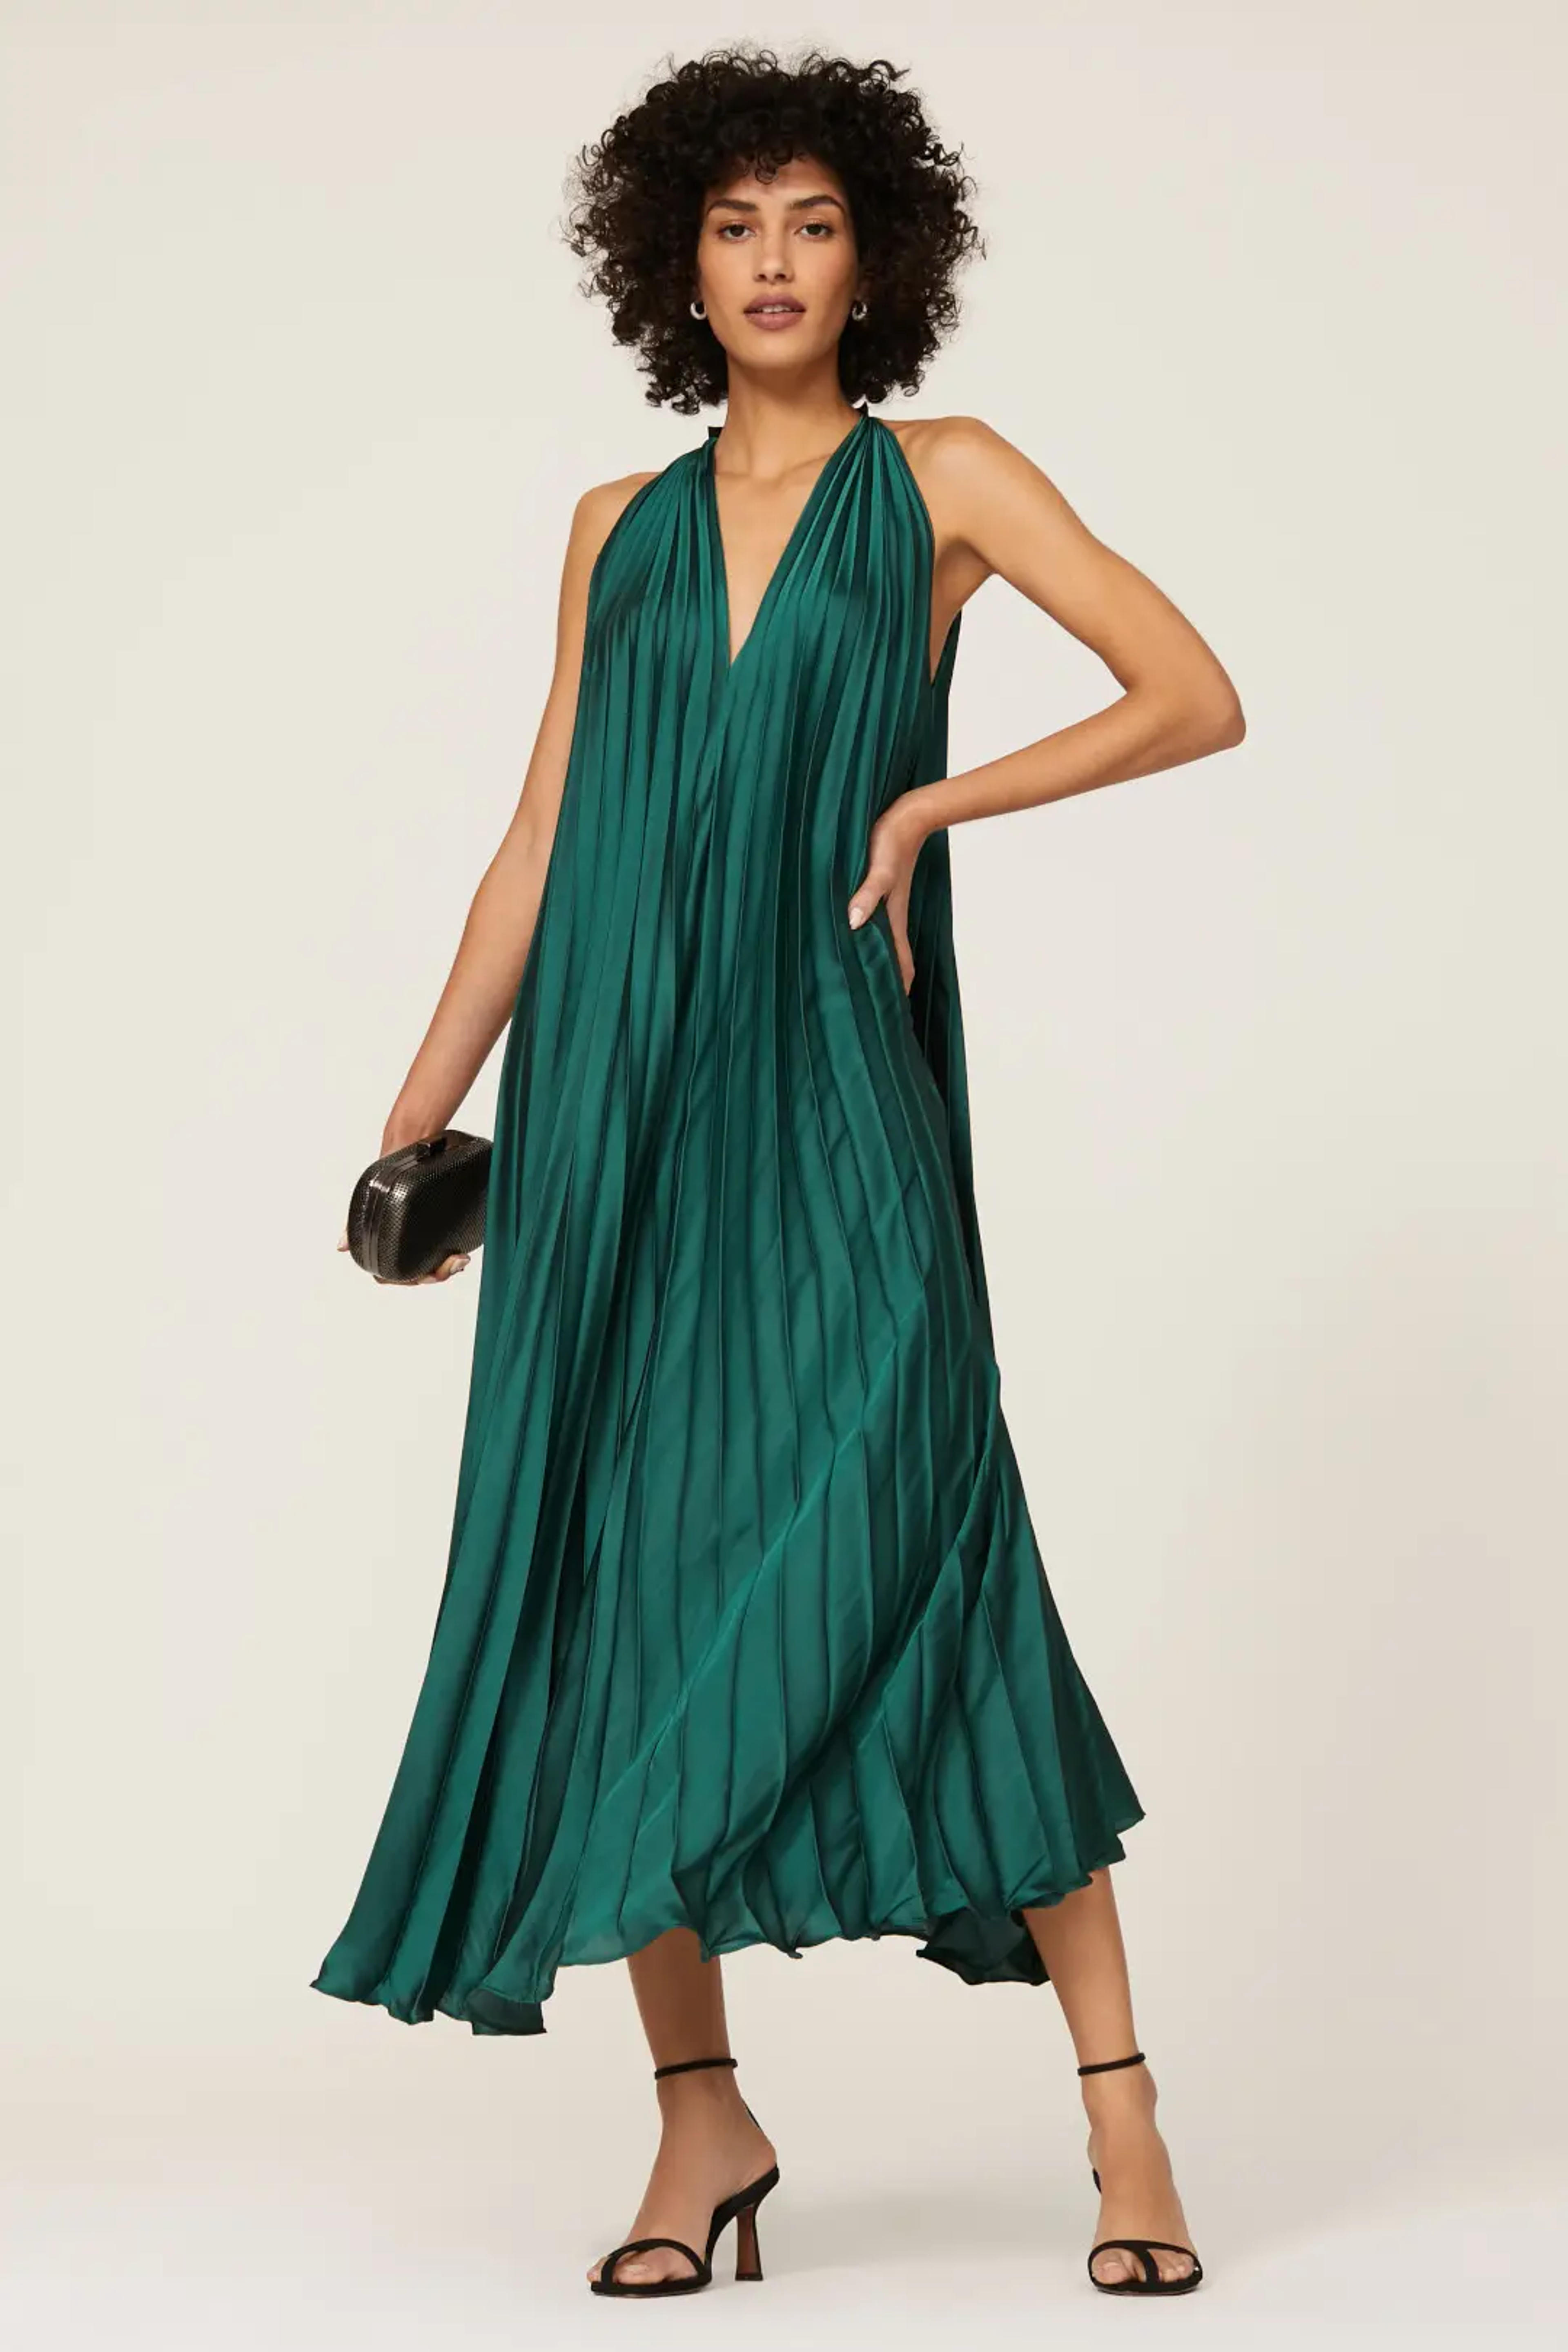 Pleated Halter Dress by TOME Collective for $30 - $32 | Rent the Runway